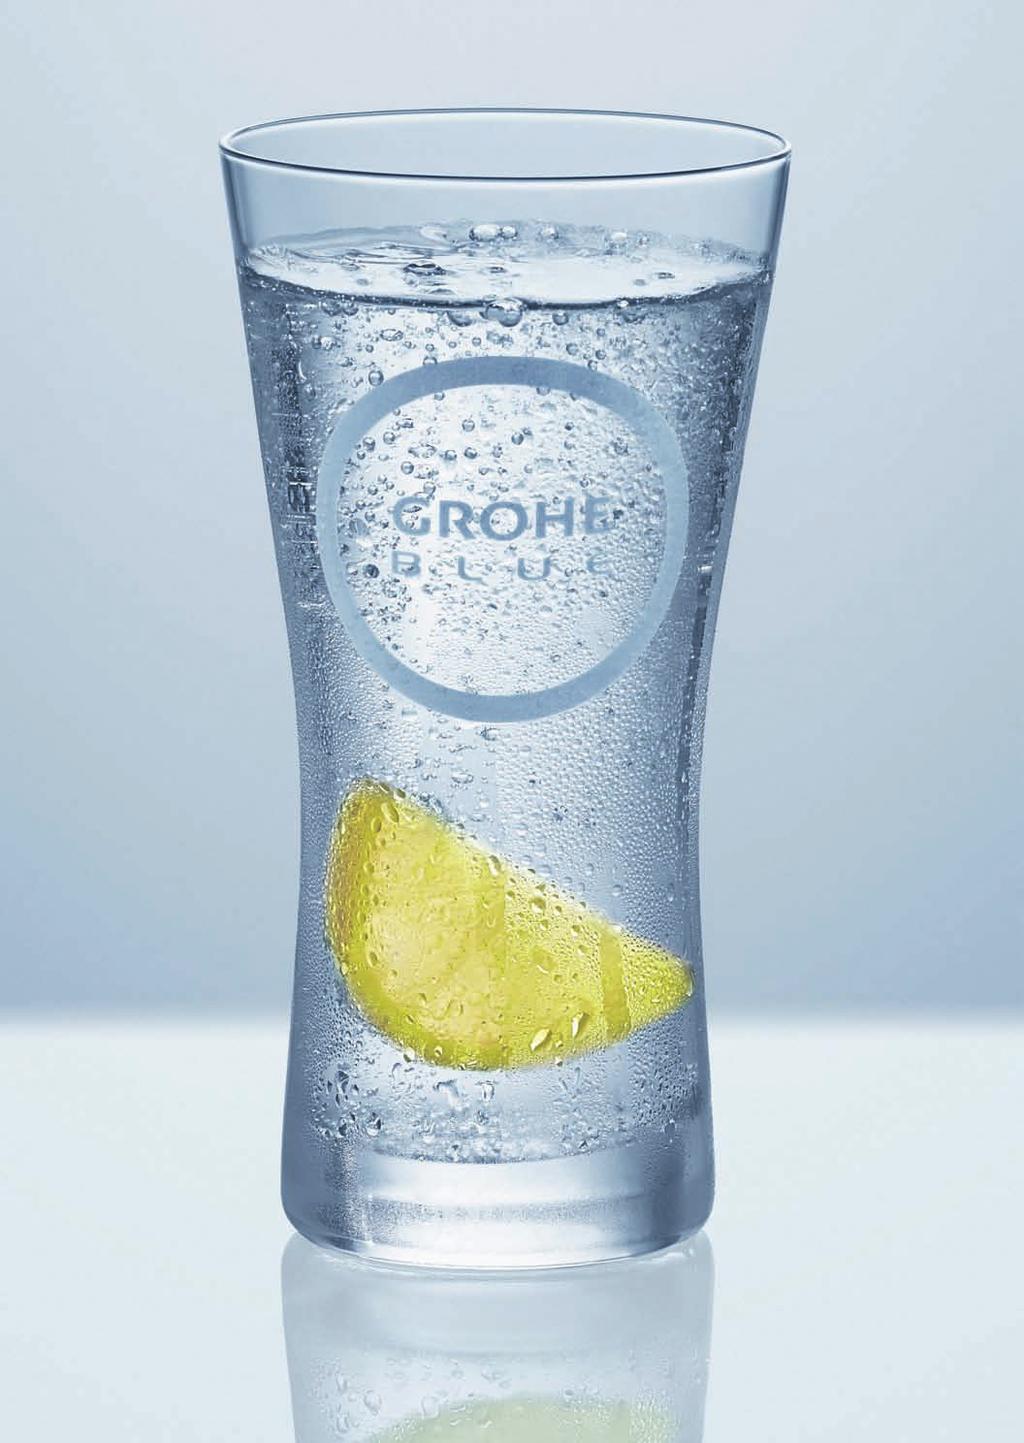 perfectly CHILLED JuST AS you LIKE IT Imagine the refreshing sensation of chilled water cool and thirst-quenching.